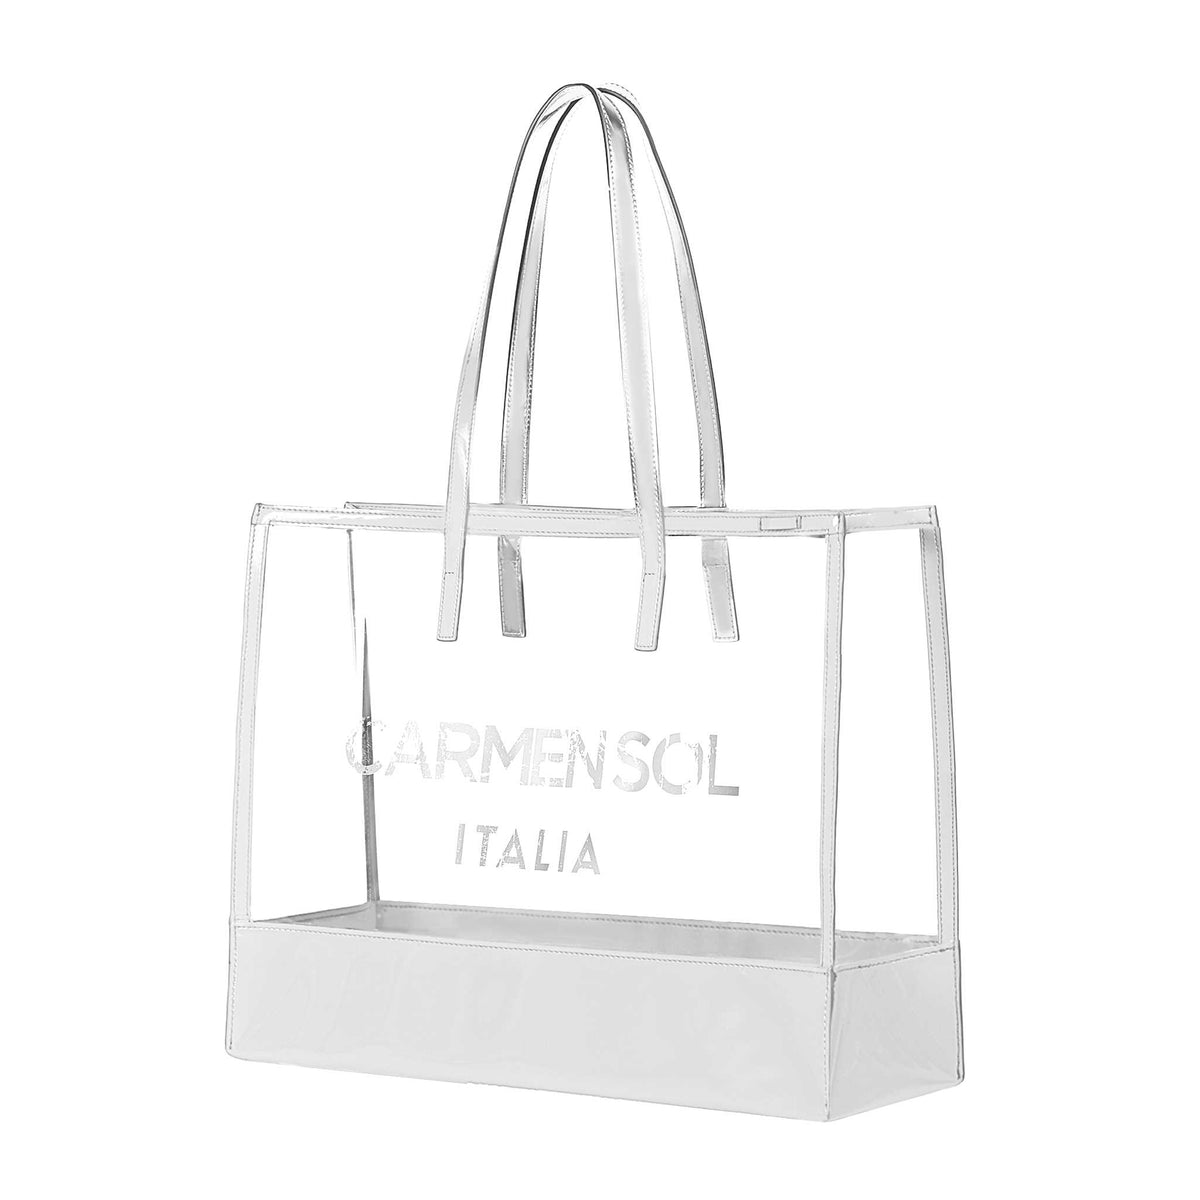 Carmen Sol large tote bags in color white for the beach